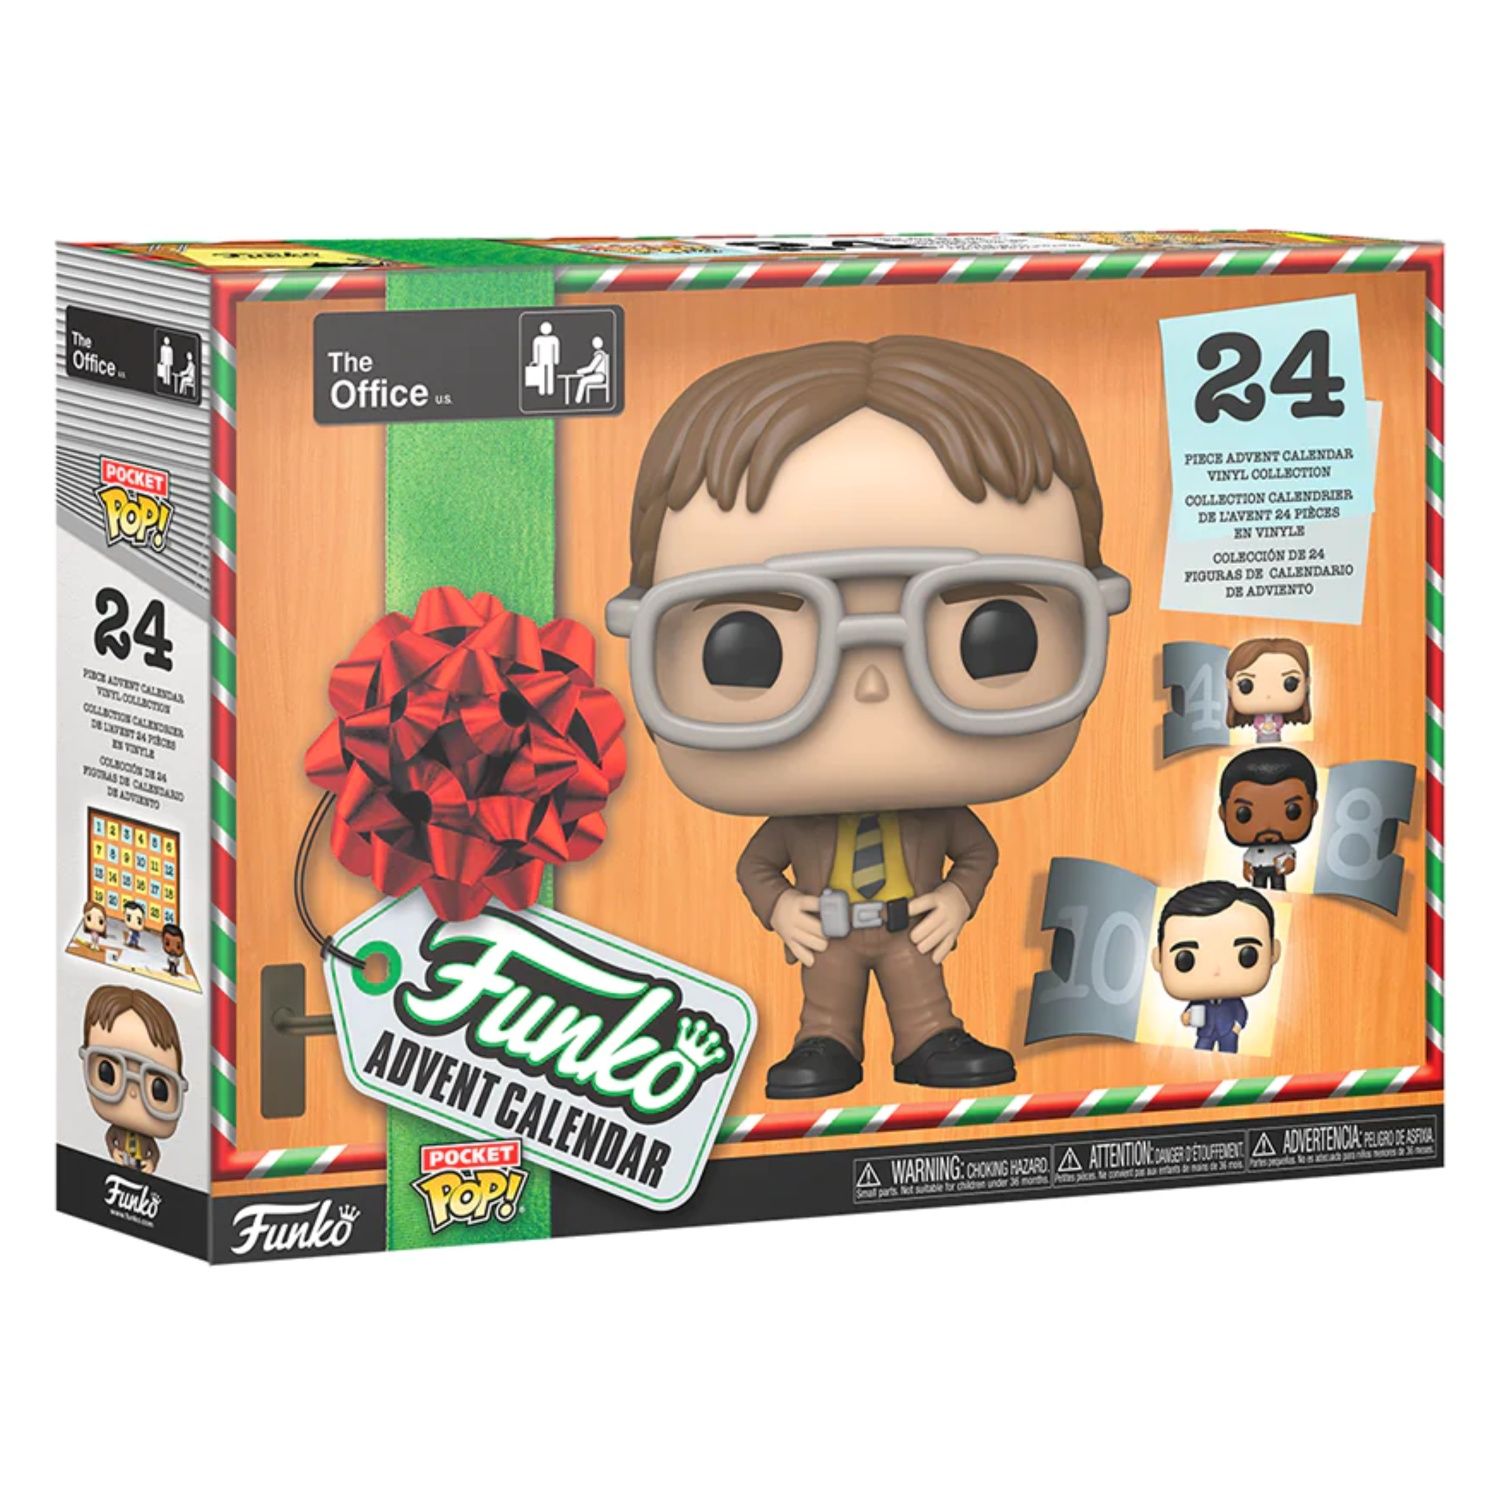 This image depicts the outside packaging for The Office Funko Advent Calendar. It has various figurines printed on the front.